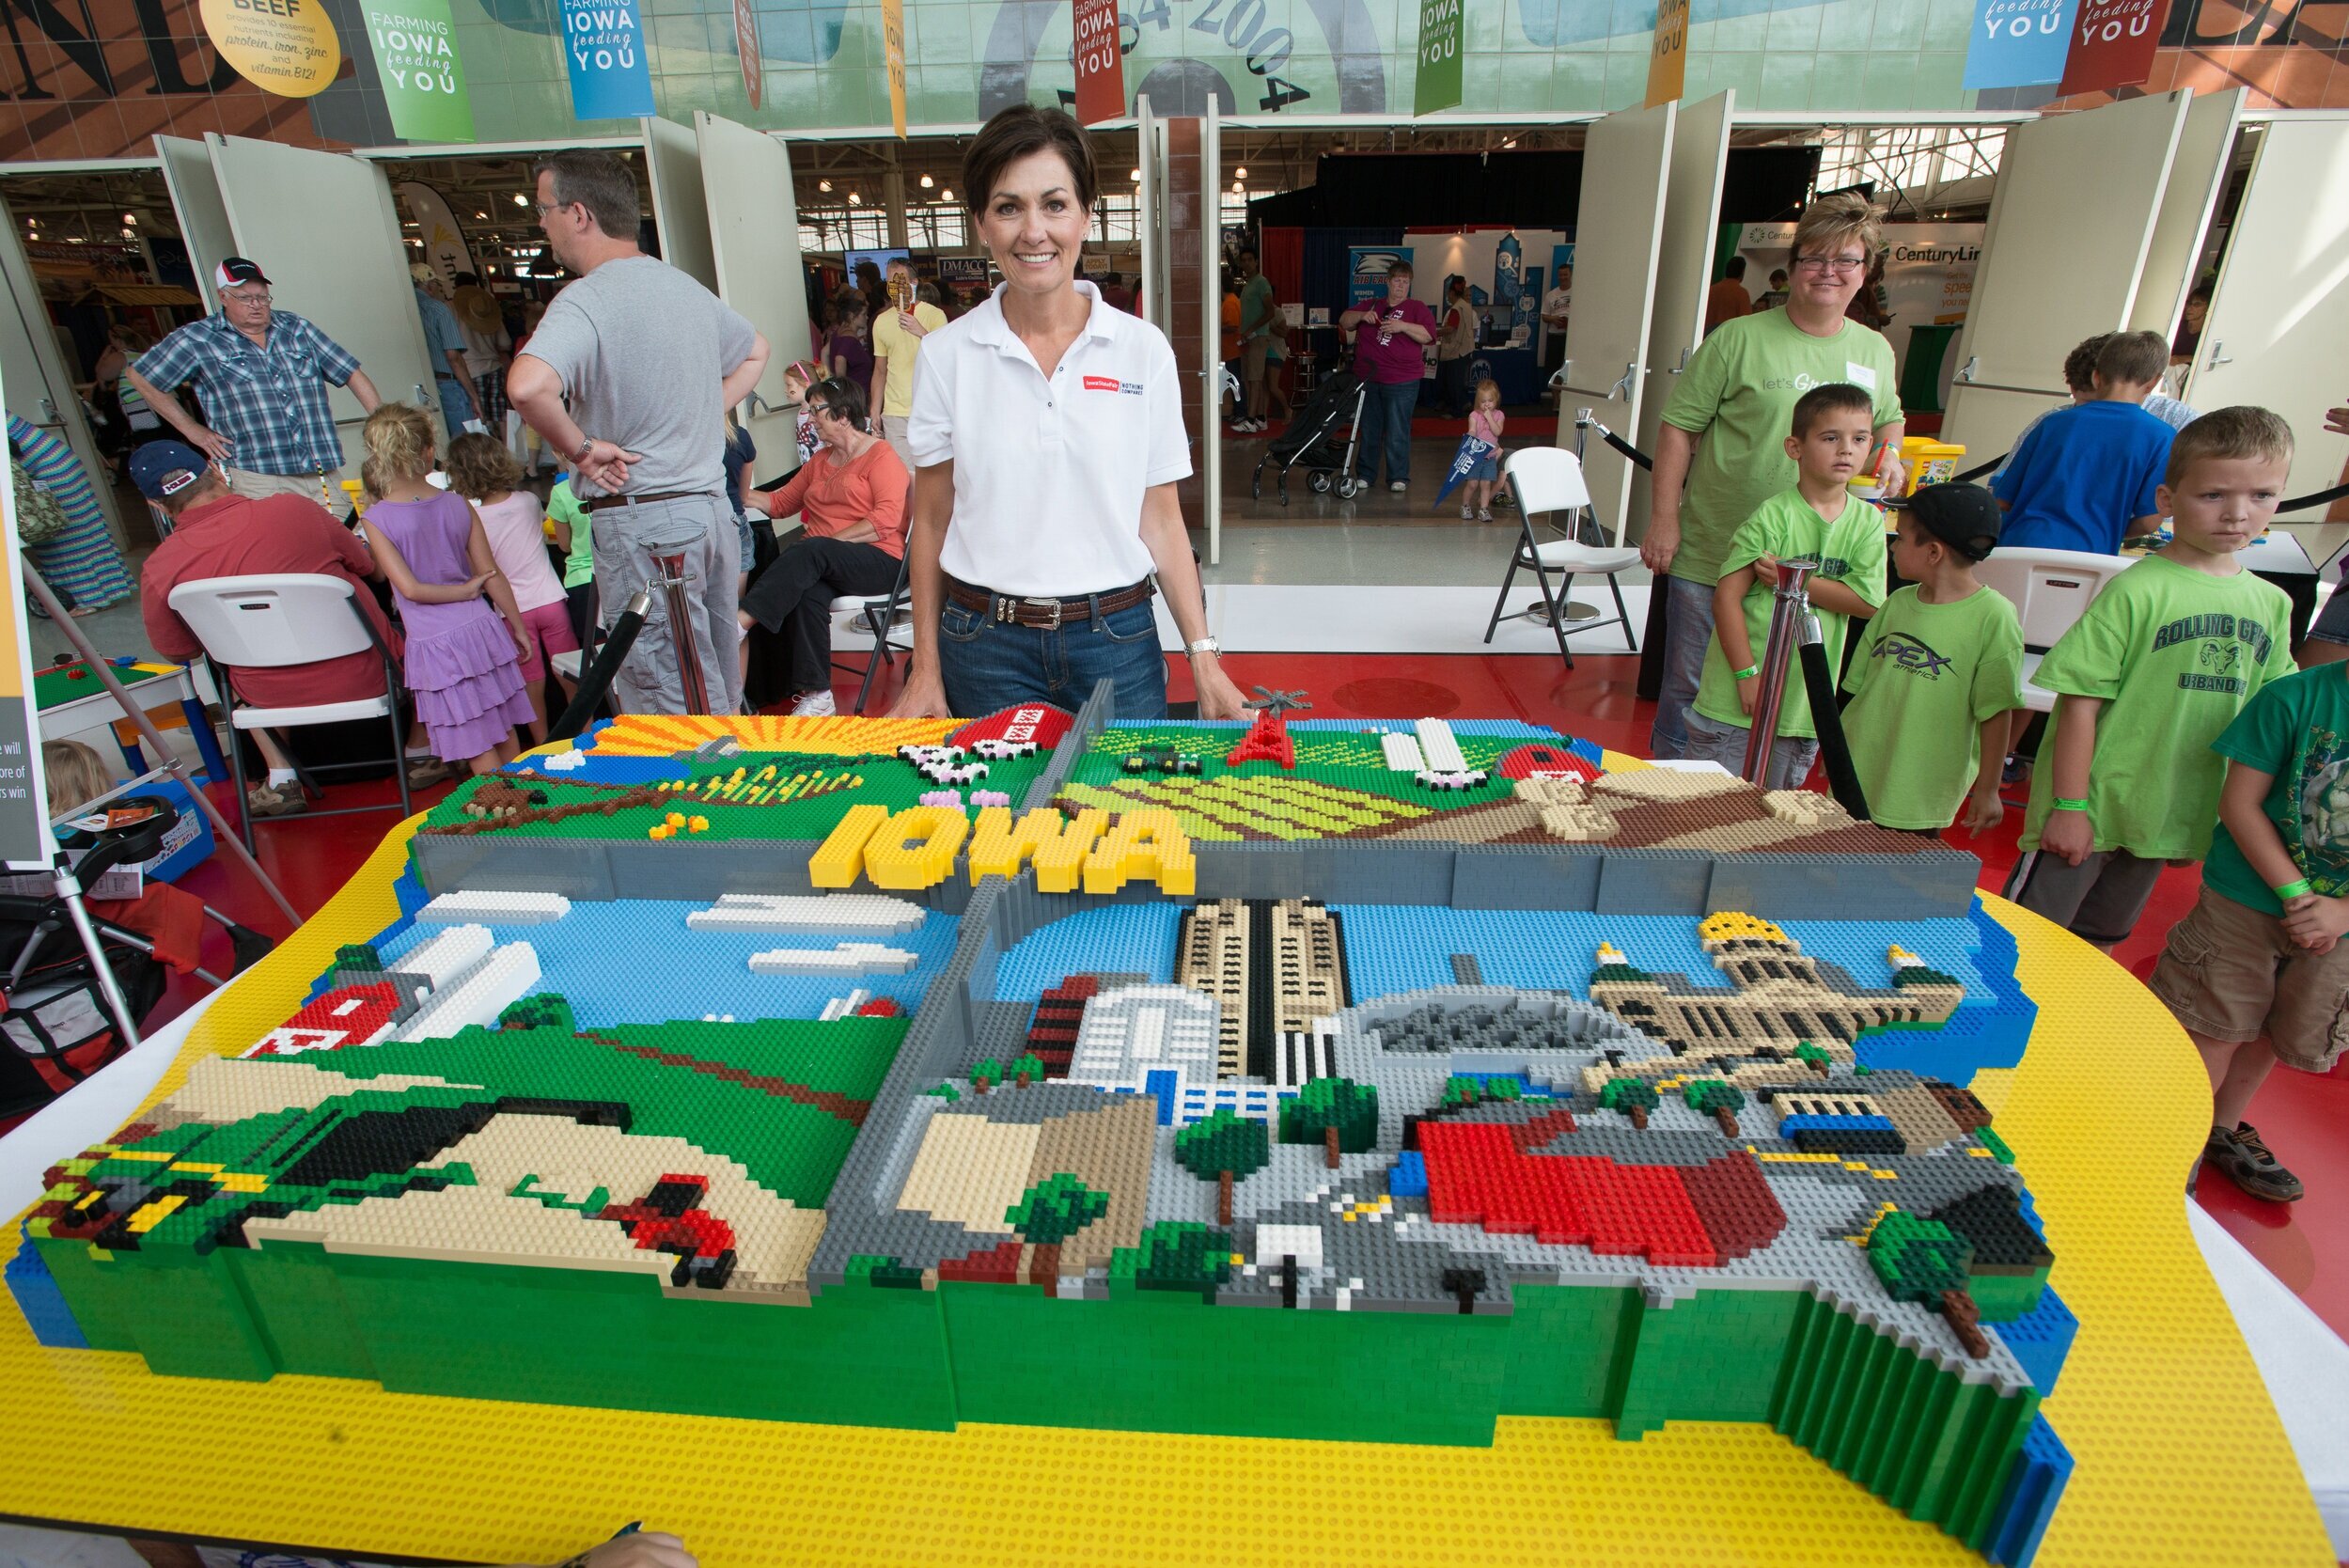 In 2013, the “Get Connected to Farming” display featured LEGO artwork built by a certified LEGO Professional. Governor Kim Reynolds poses for a picture with the Iowa LEGO artwork.